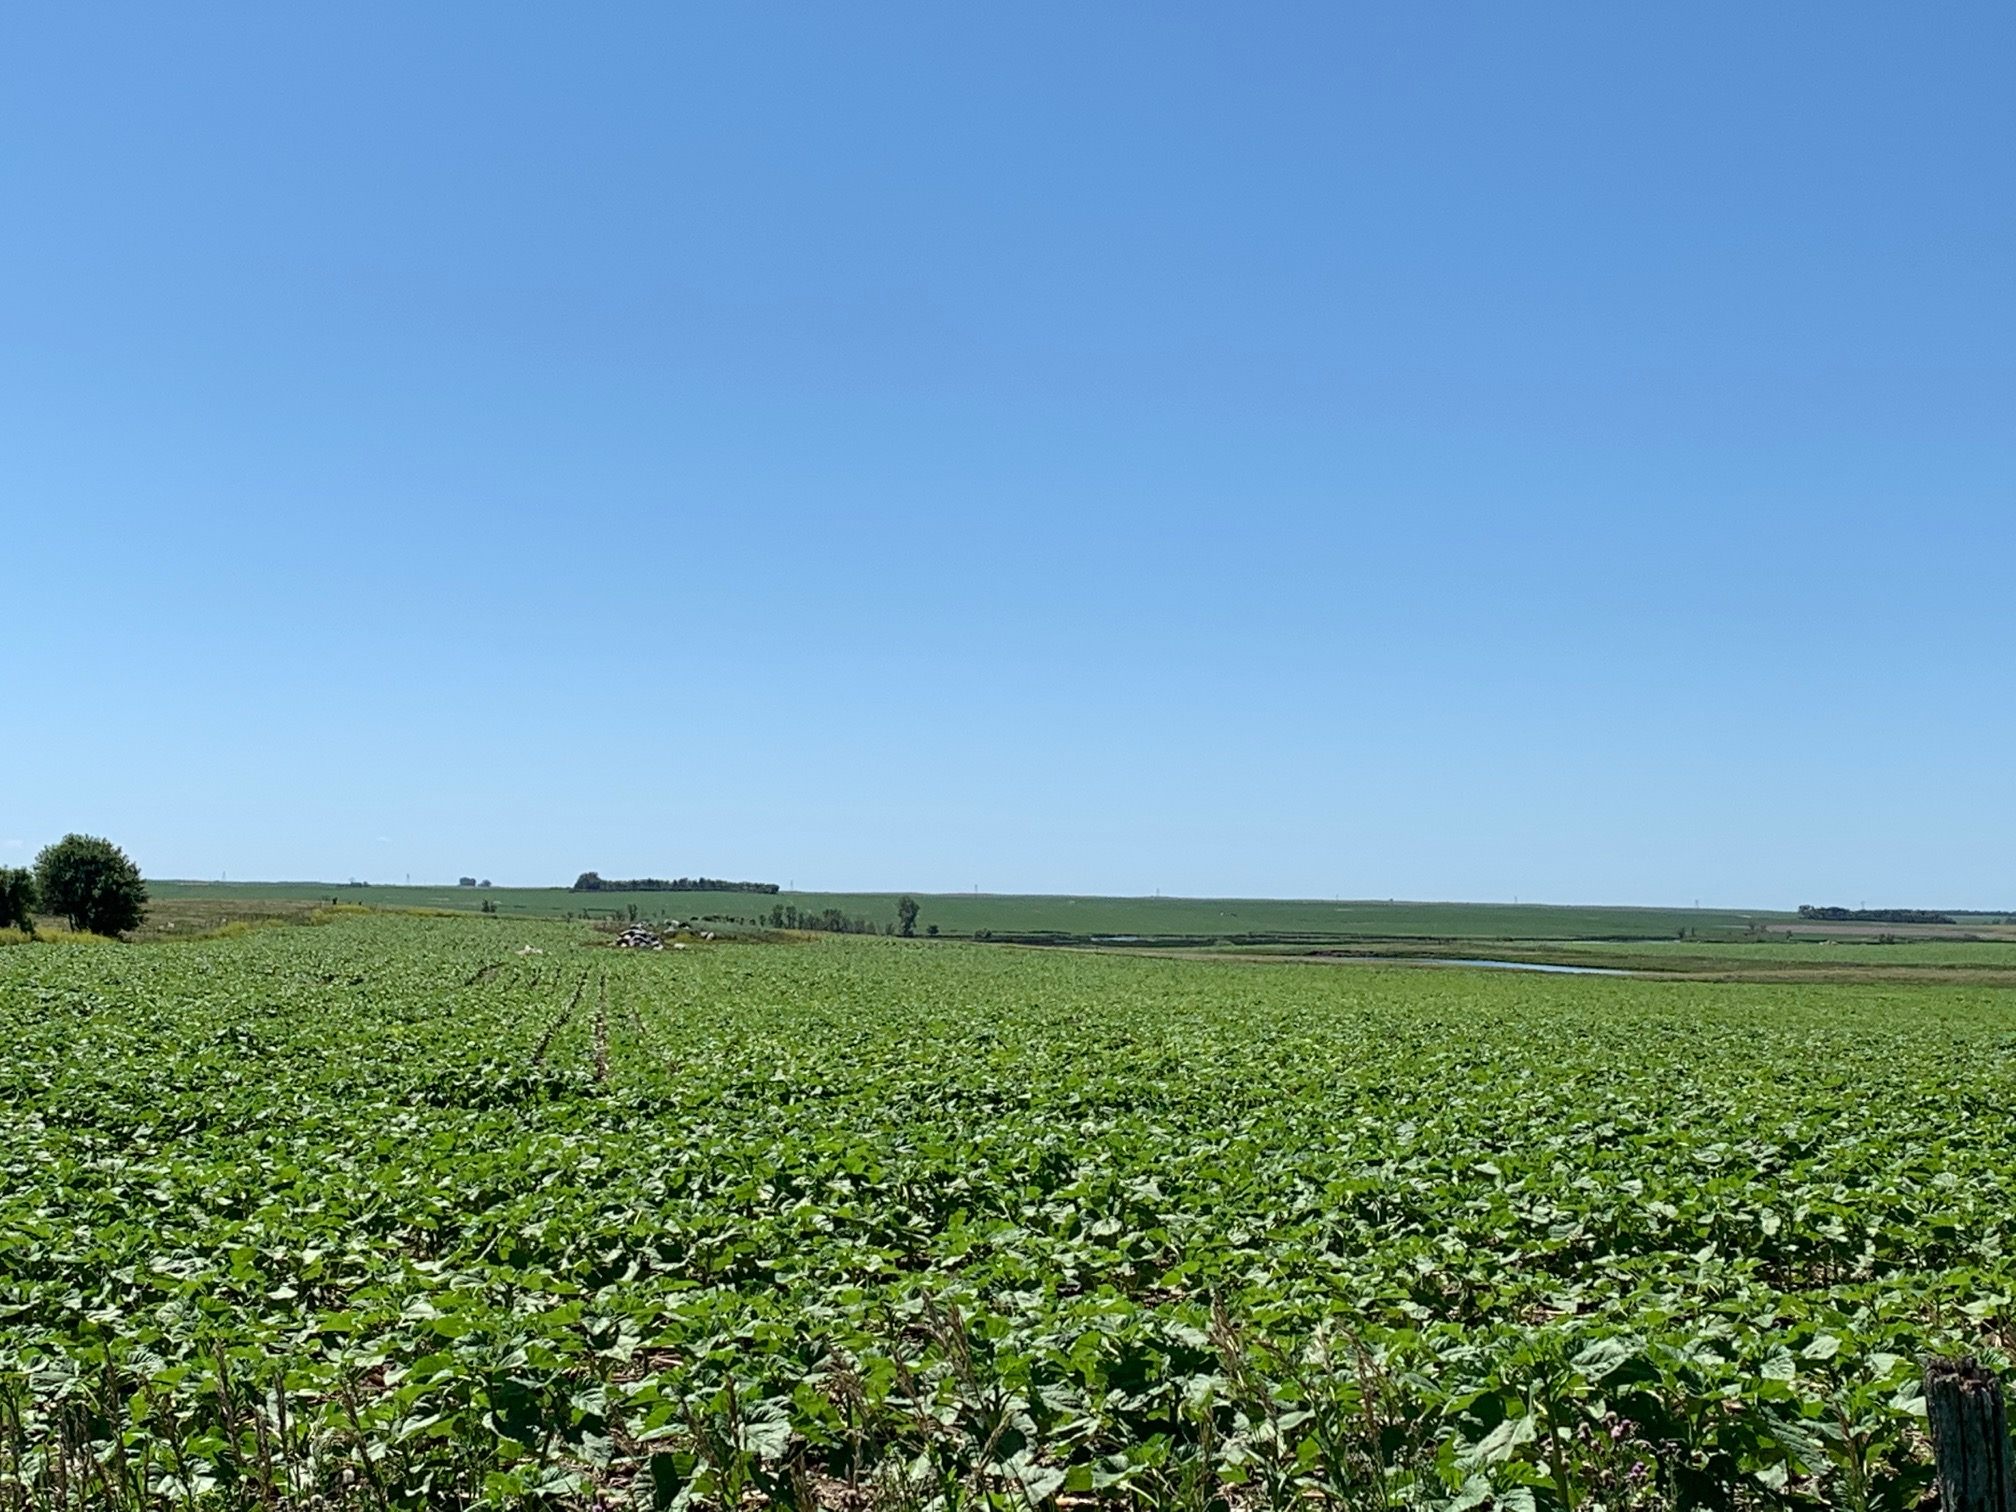 Afternoon Ag News, July 2, 2021: Soybean acreage lower than expected in June 30 report